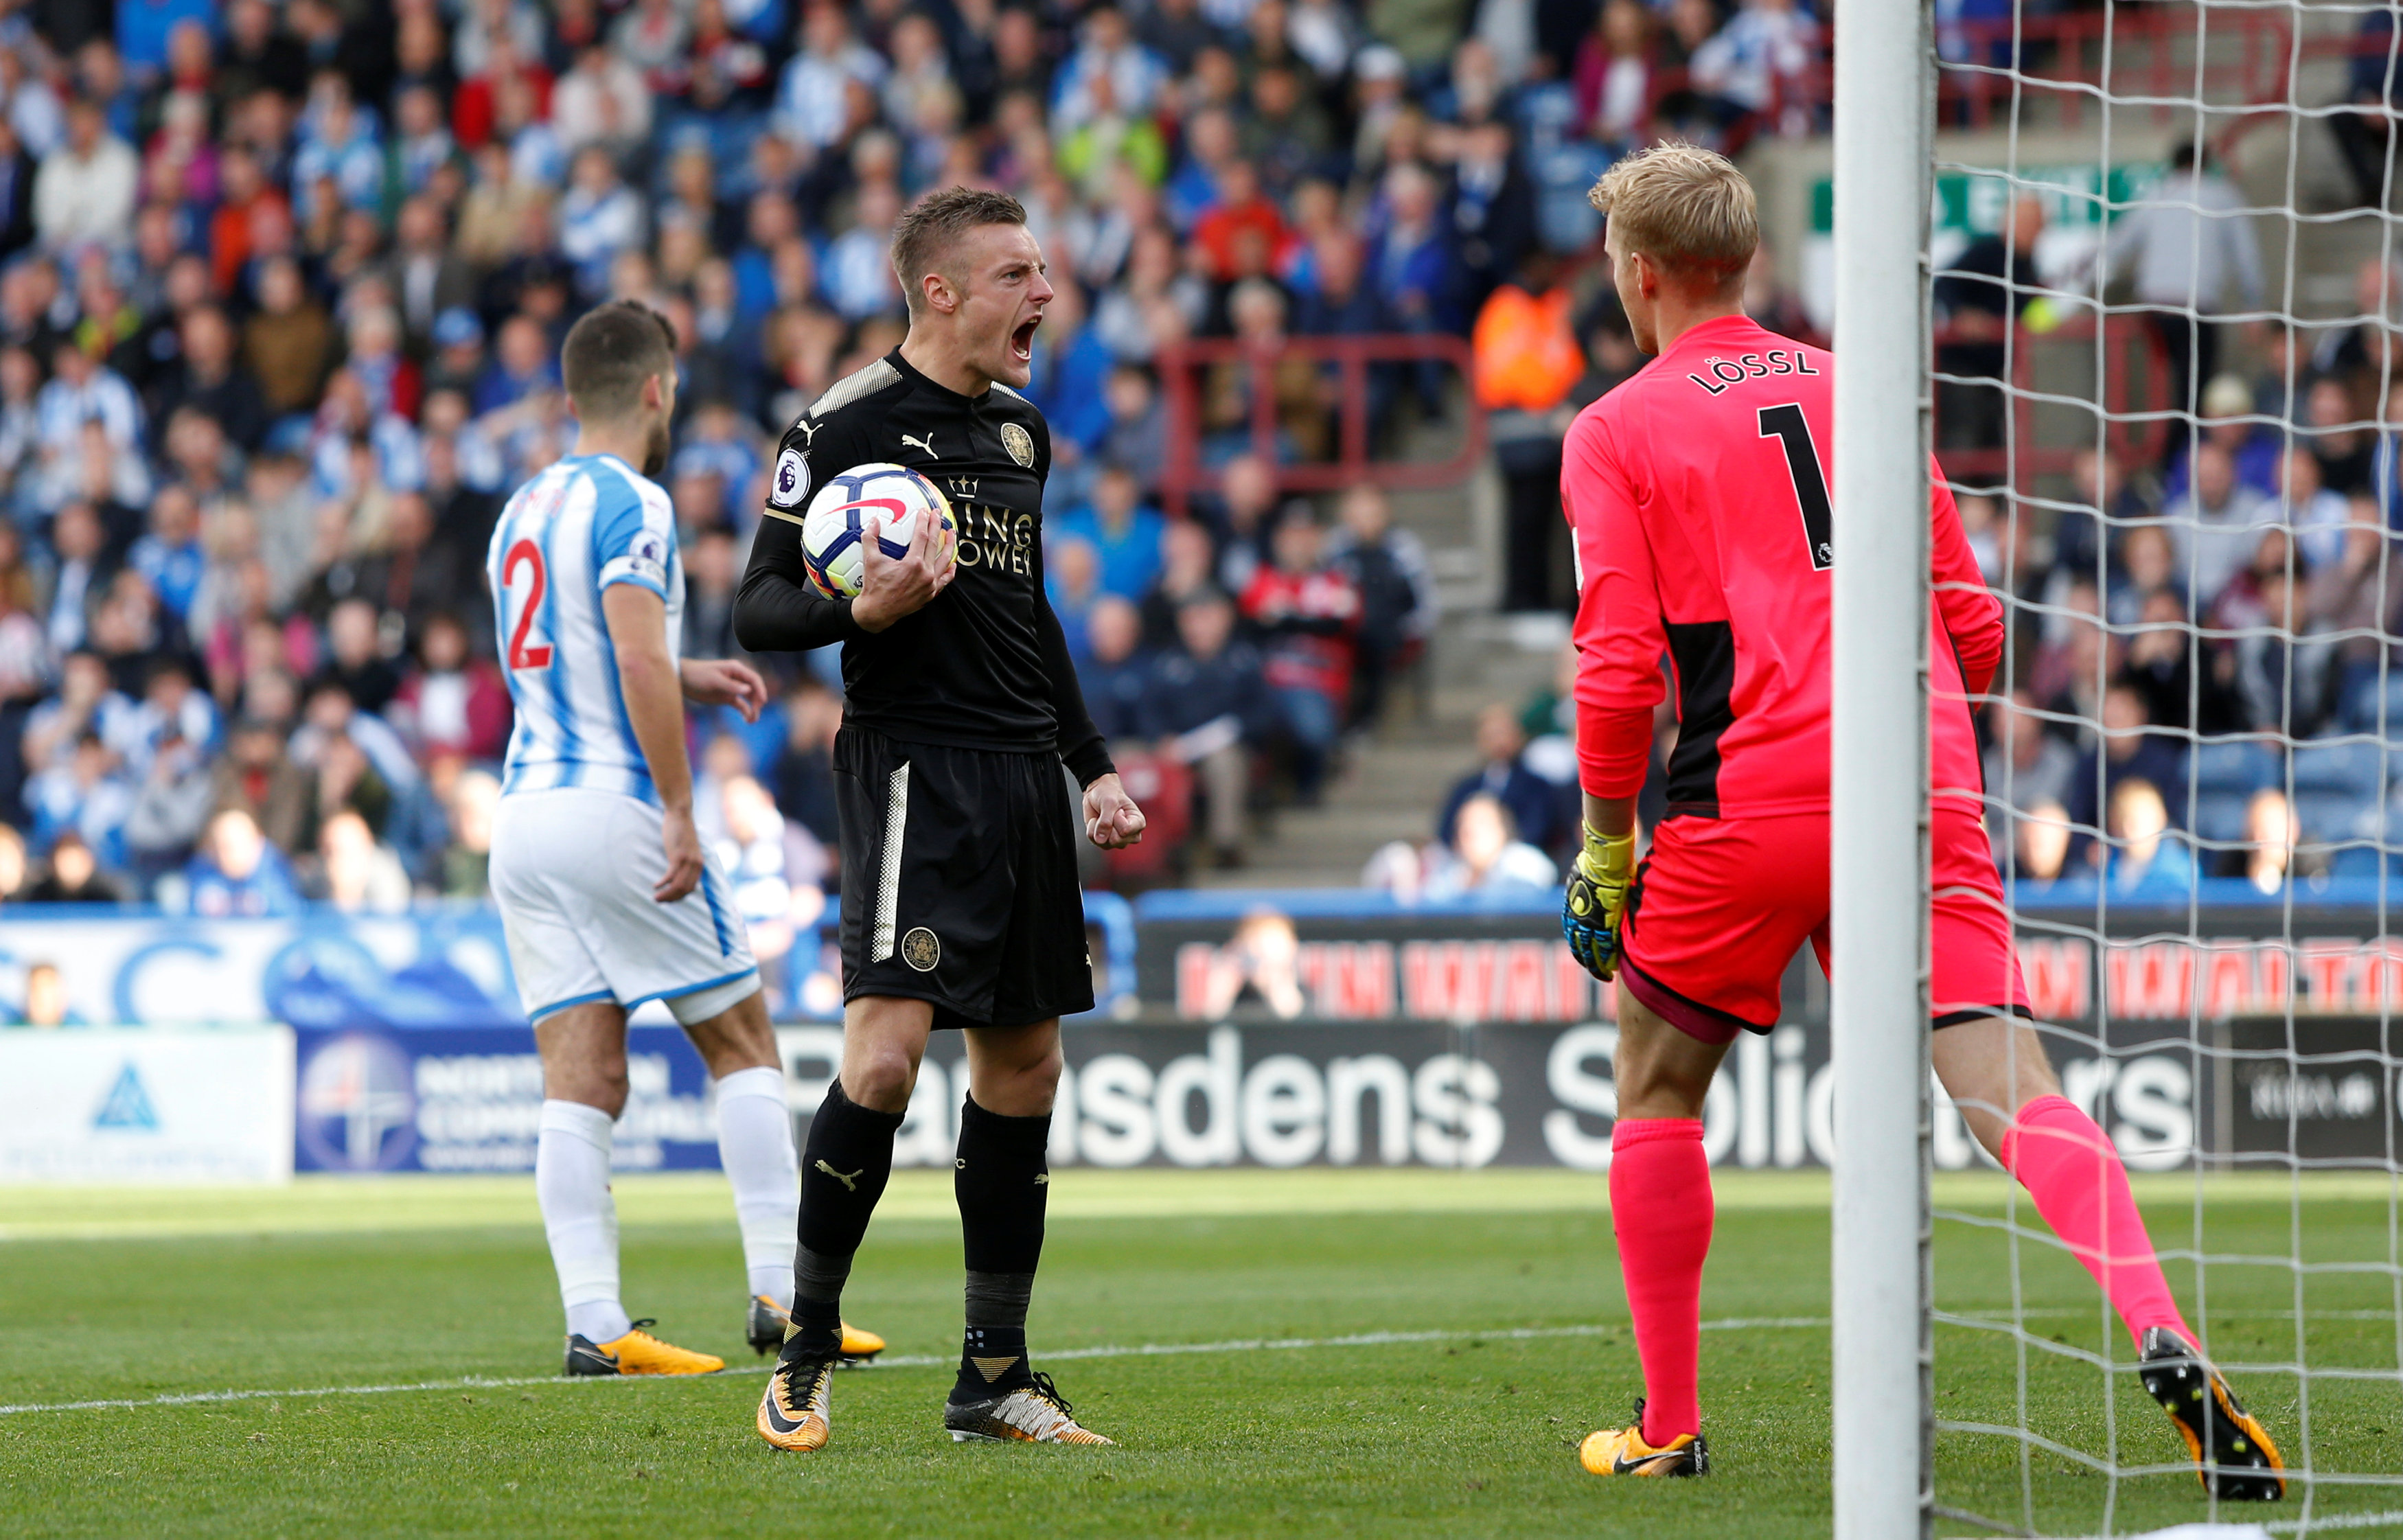 Football: Leicester City's Jamie Vardy earns 1-1 draw at Huddersfield Town